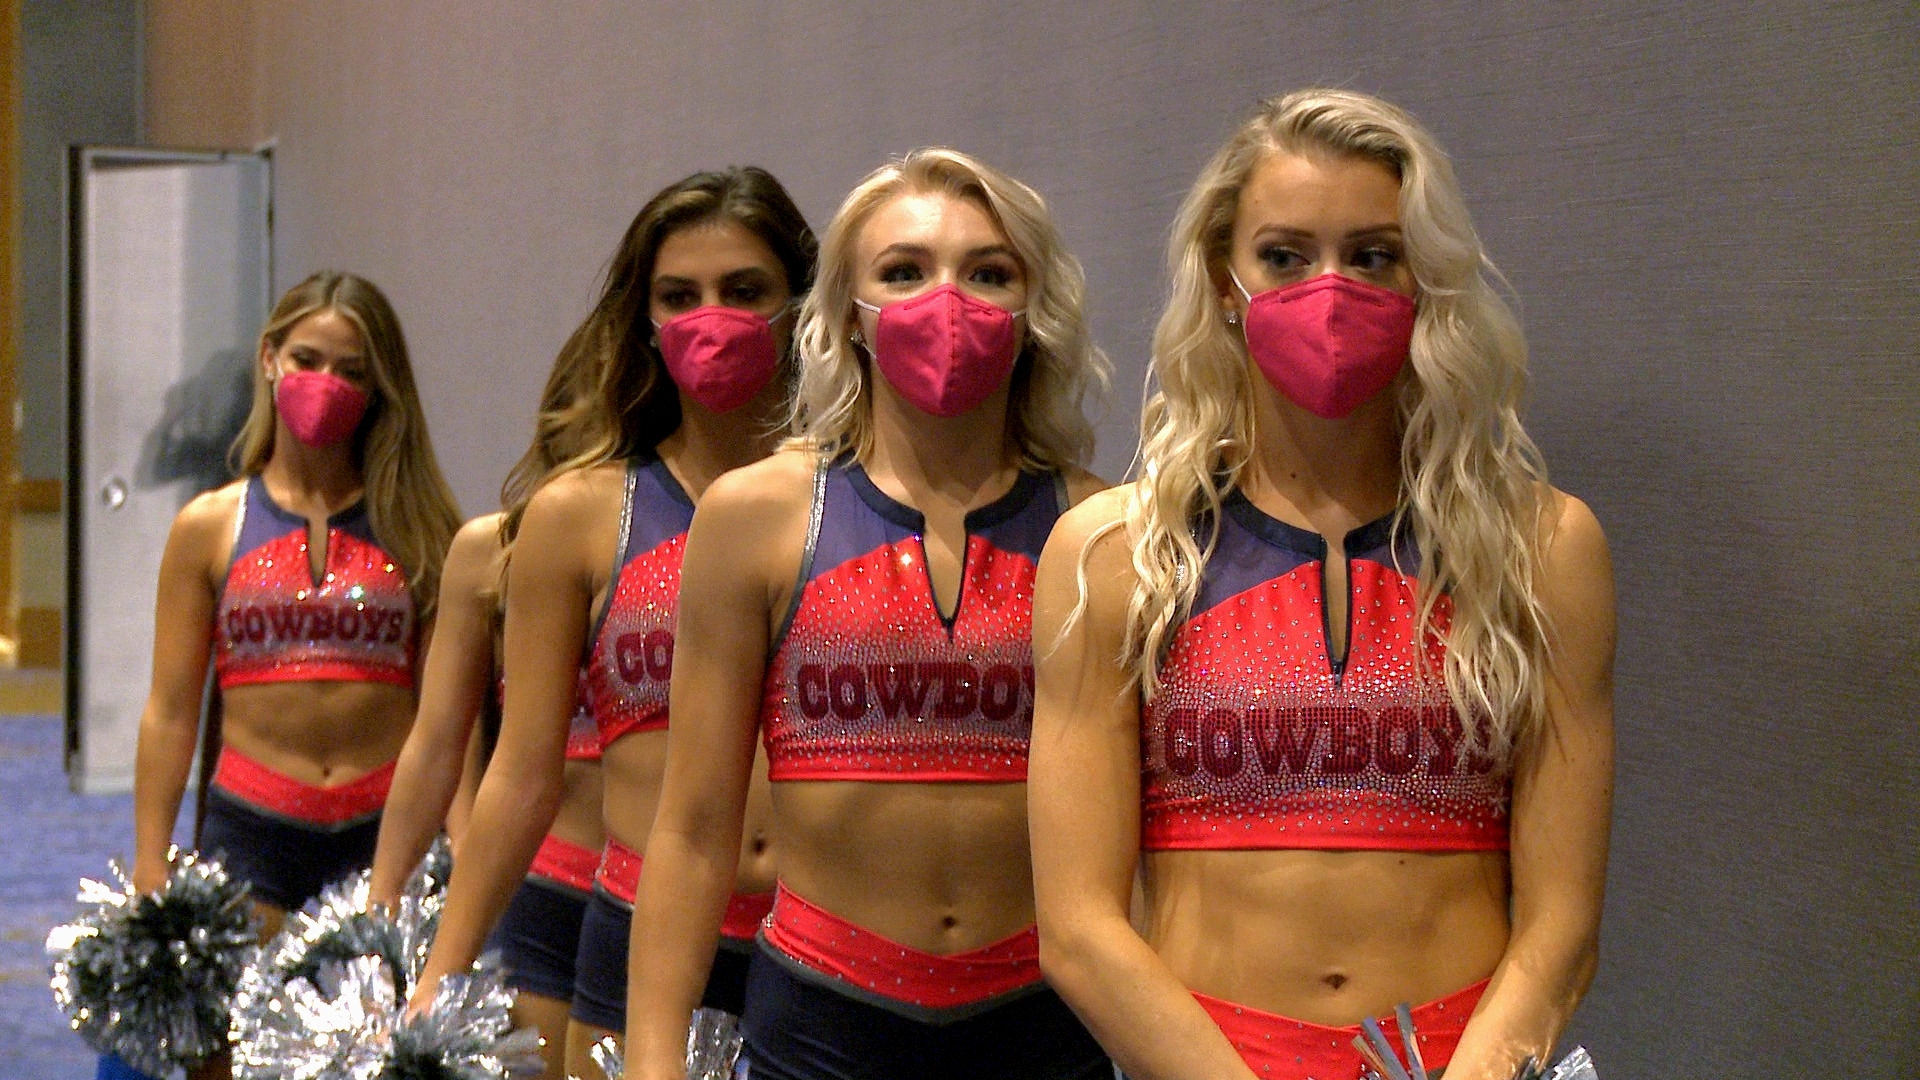 Watch Dallas Cowboys Cheerleaders Making The Team Season 15 Episode 1 Like No Other